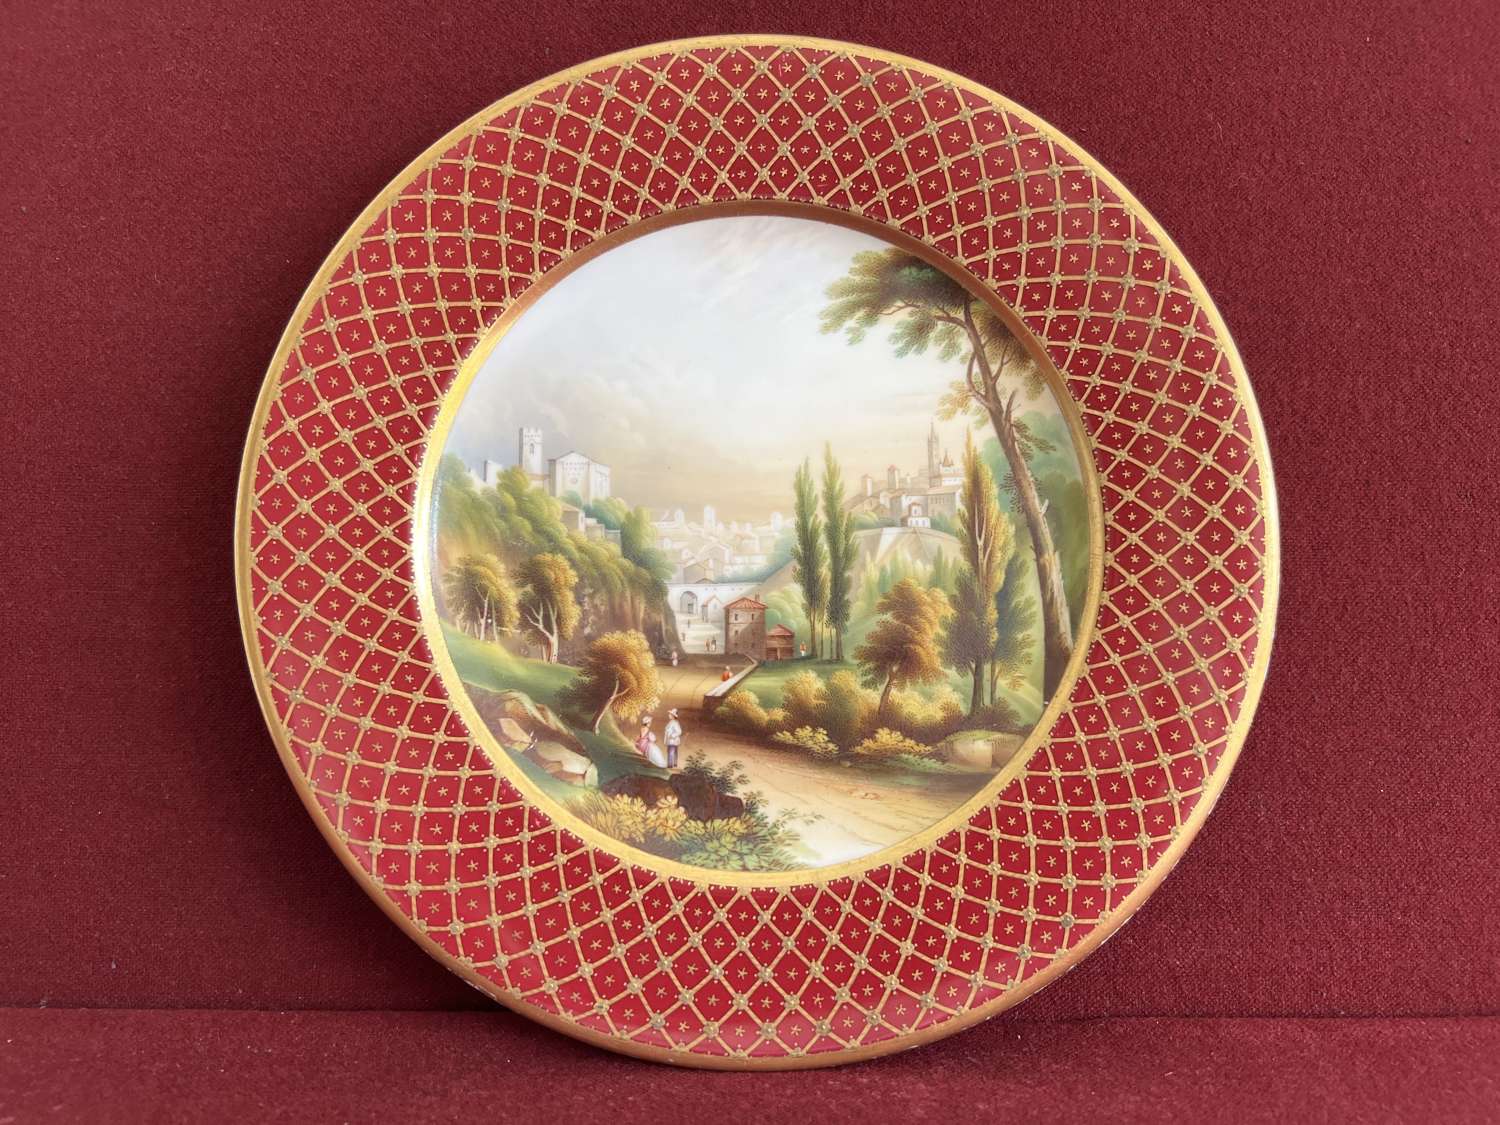 Staffordshire Porcelain Plate decorated with a view of Siena c.1830-50